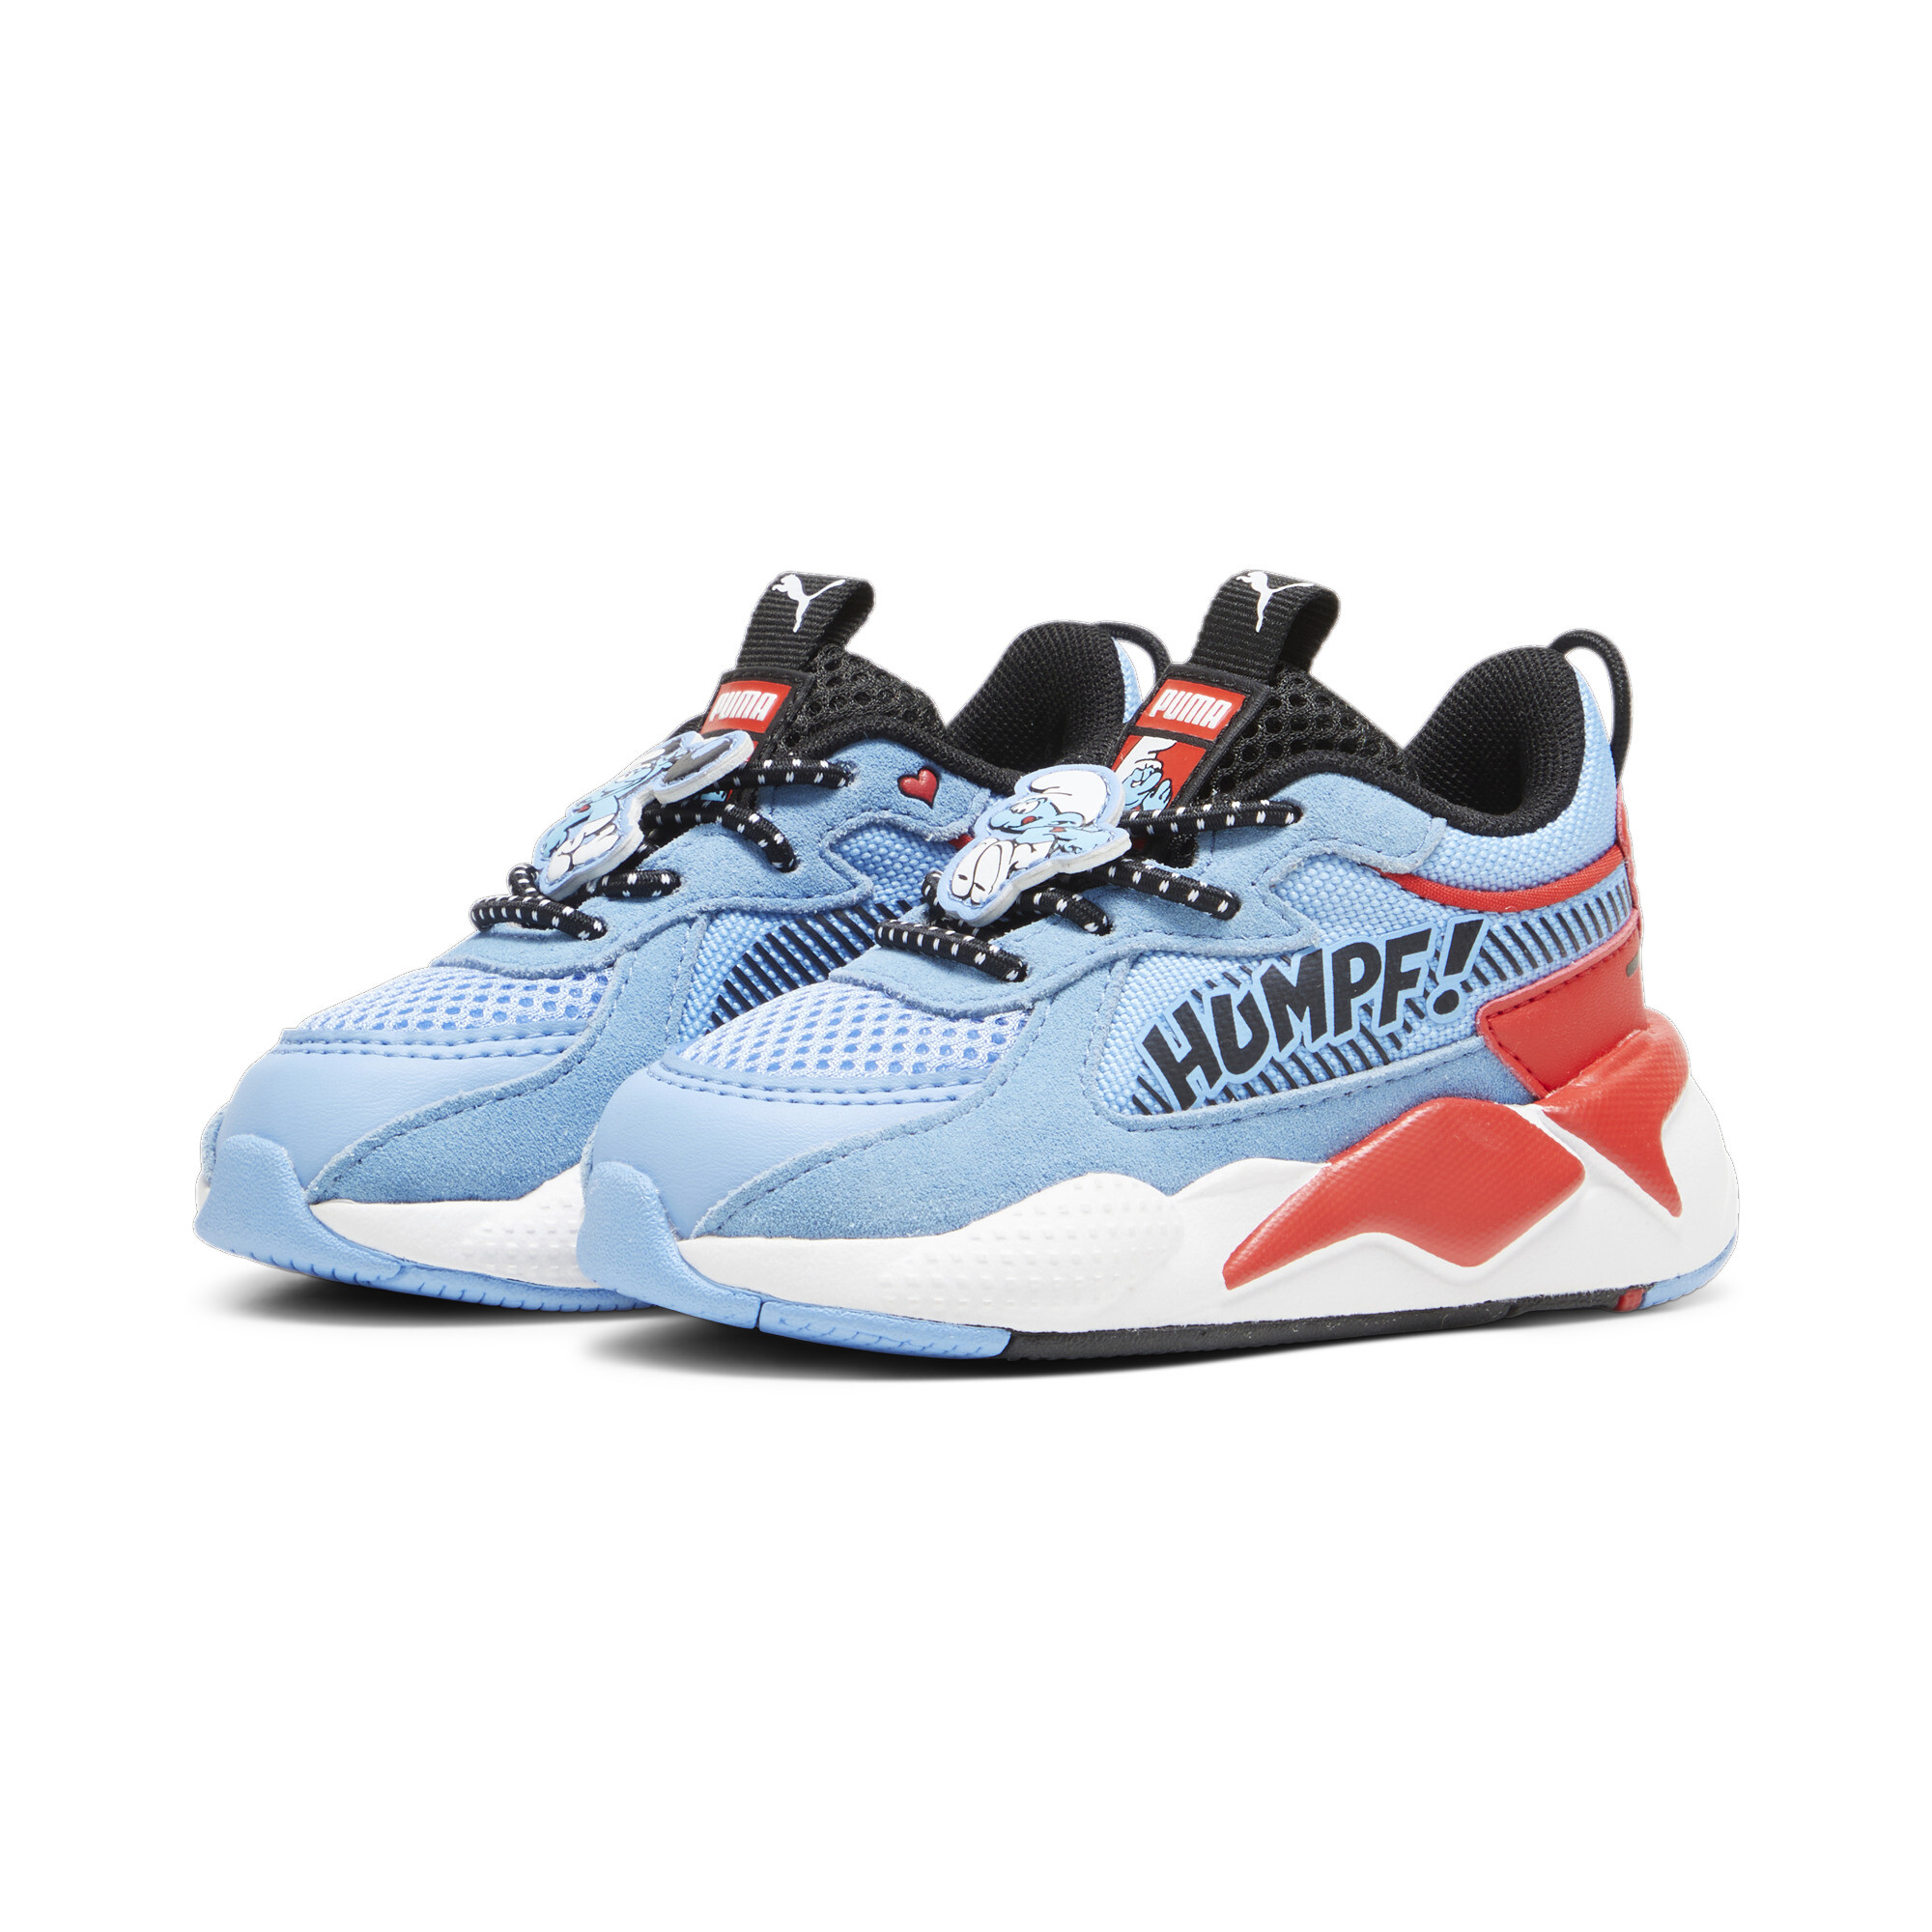 Kids' PUMA X THE SMURFS RS-X Toddlers' Sneakers In Blue, Size EU 23